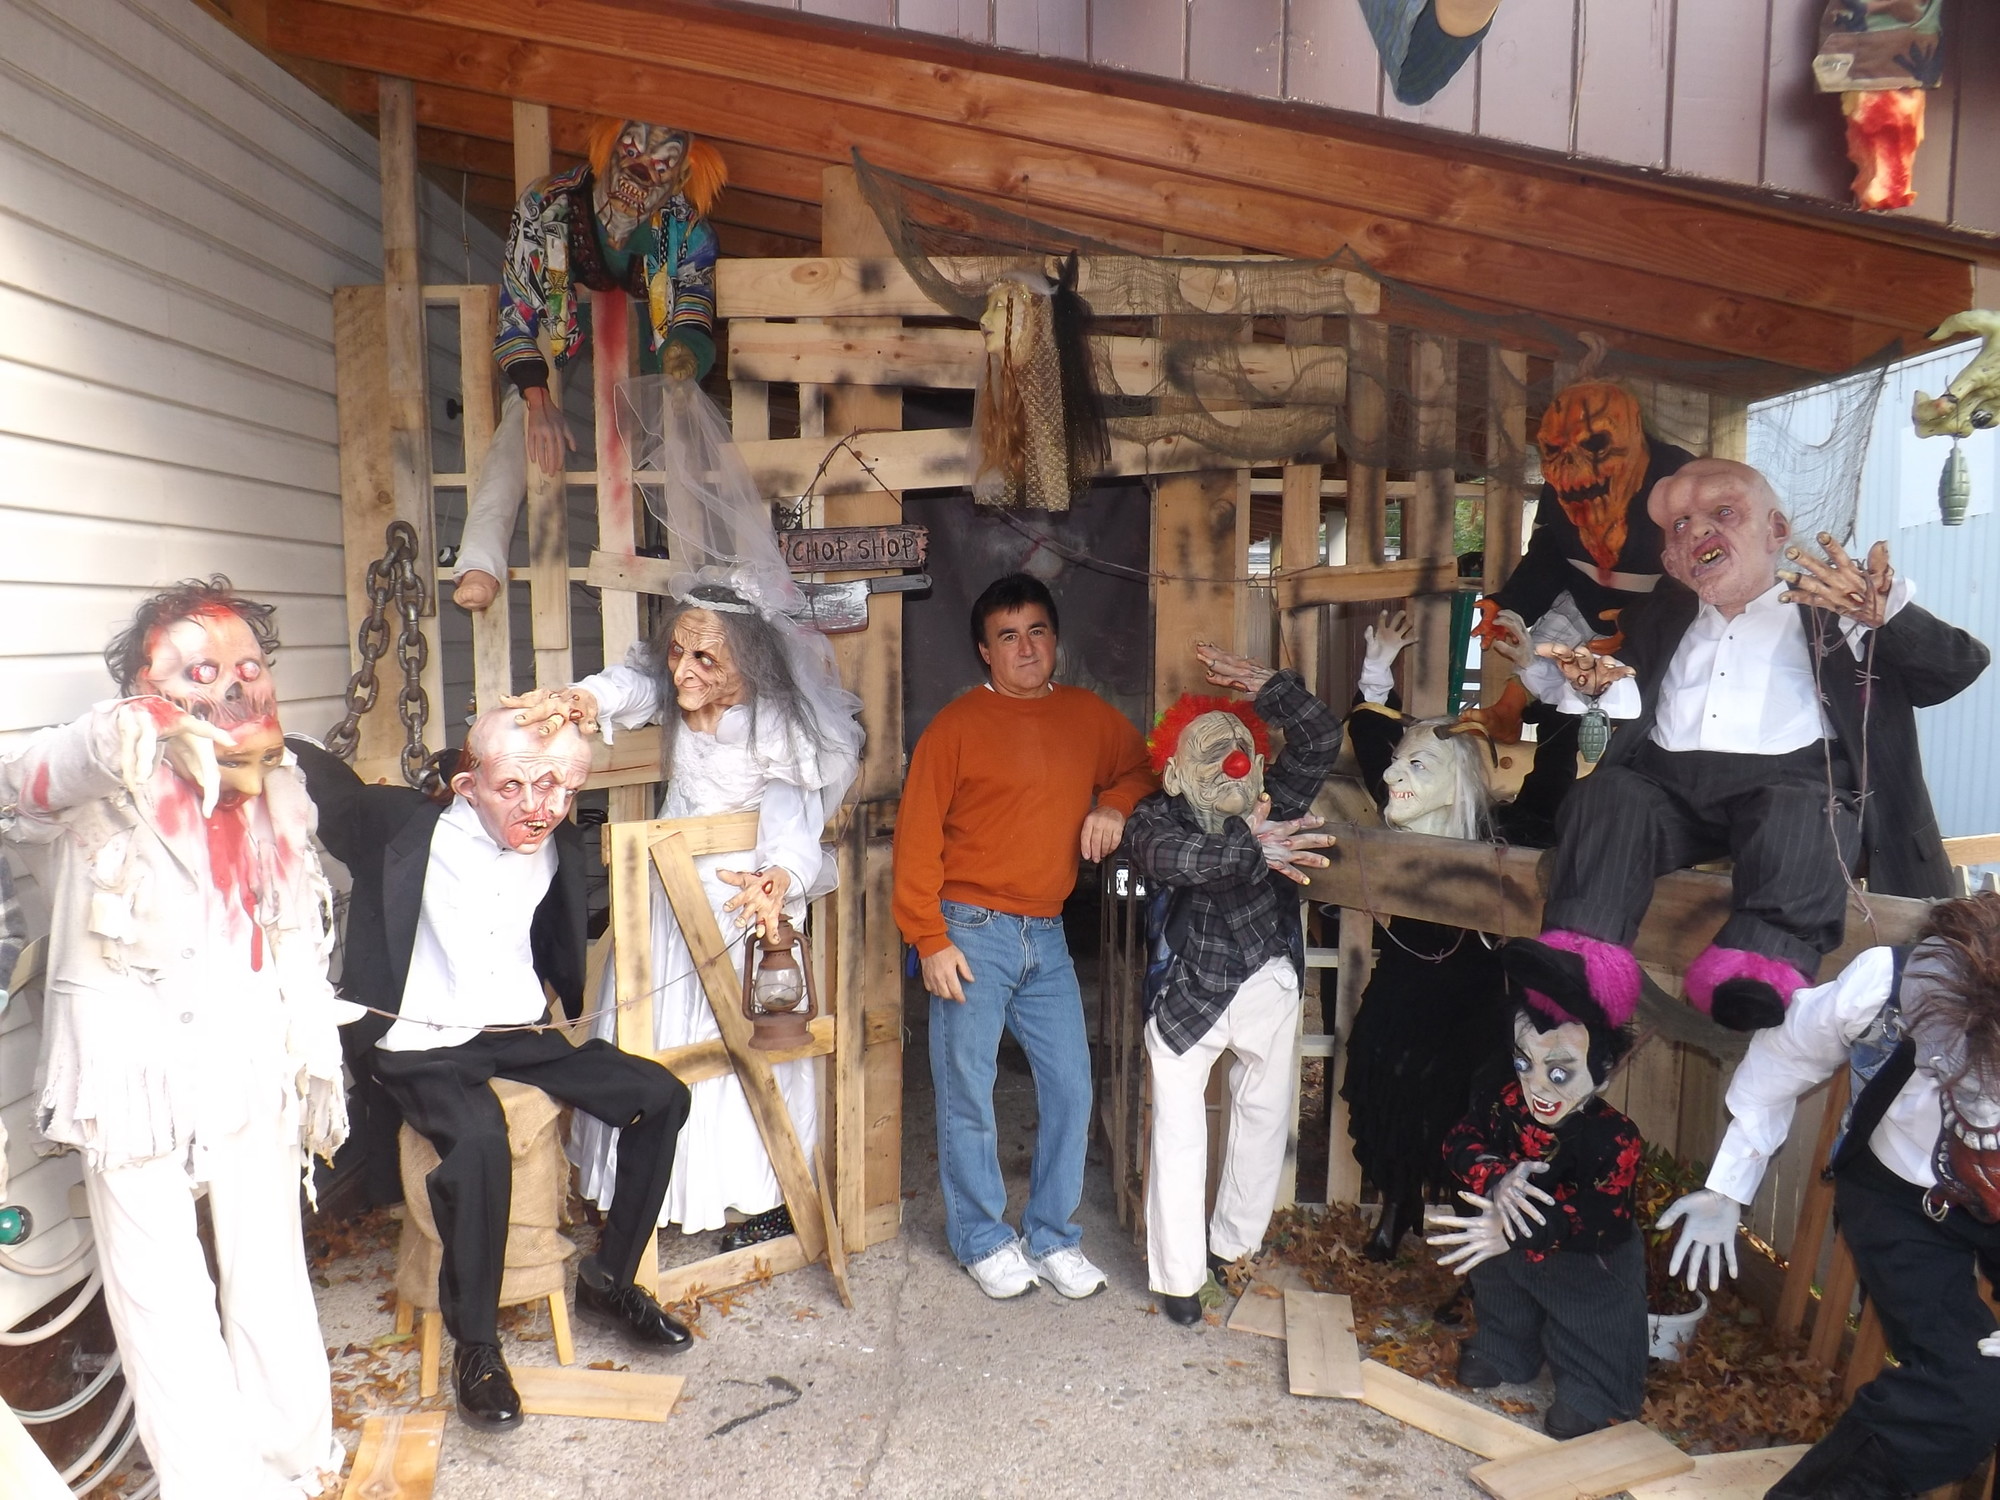 Gilardi, center, takes pride in his work and enjoys enhancing the Halloween experience for the community.